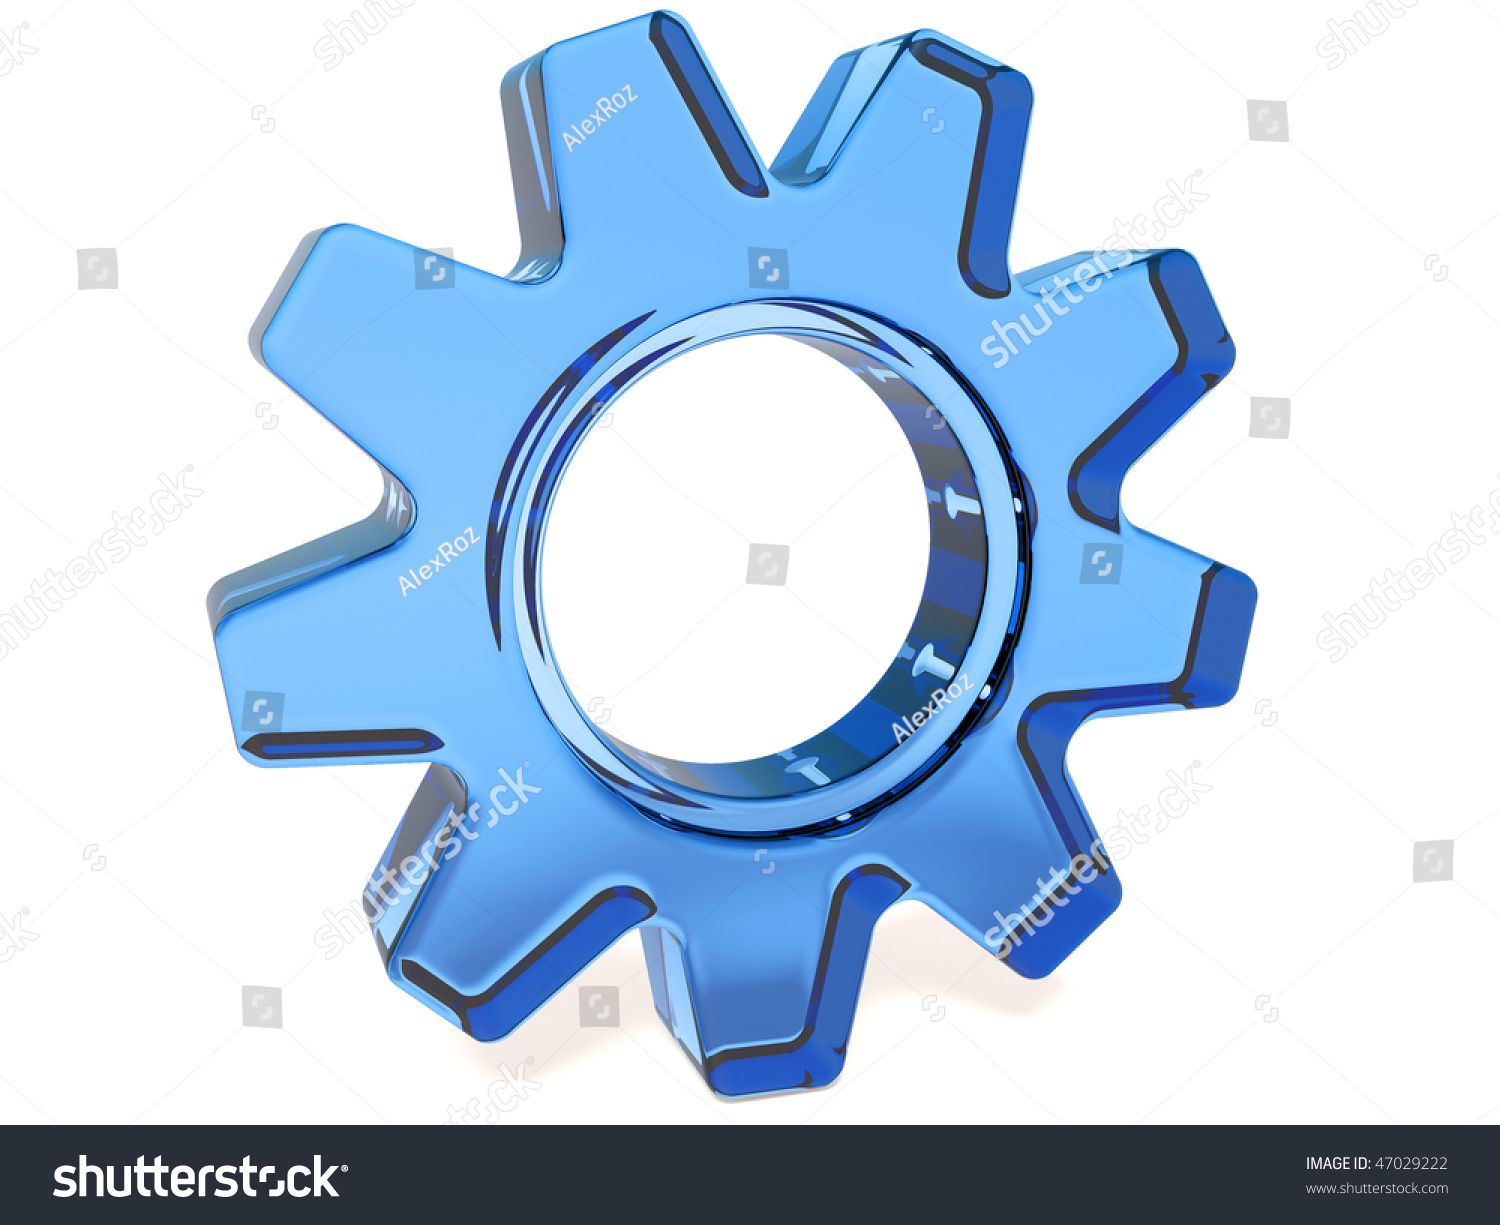 Transparent Gear On White Background Stock Photo 47029222 : Shutterstock